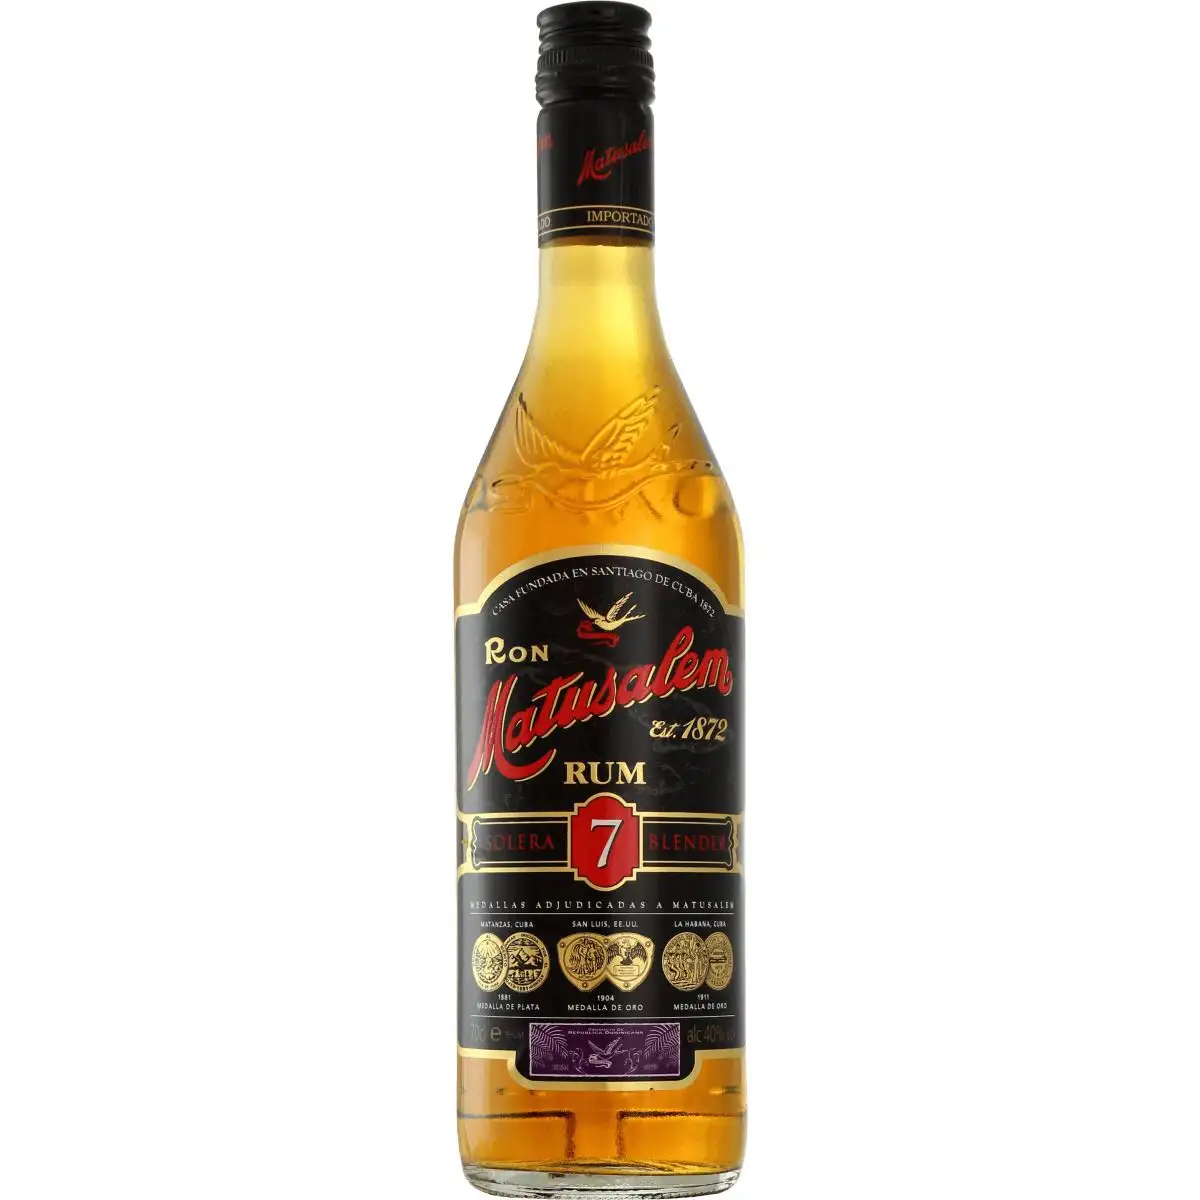 Image of the front of the bottle of the rum Solera 7 Años